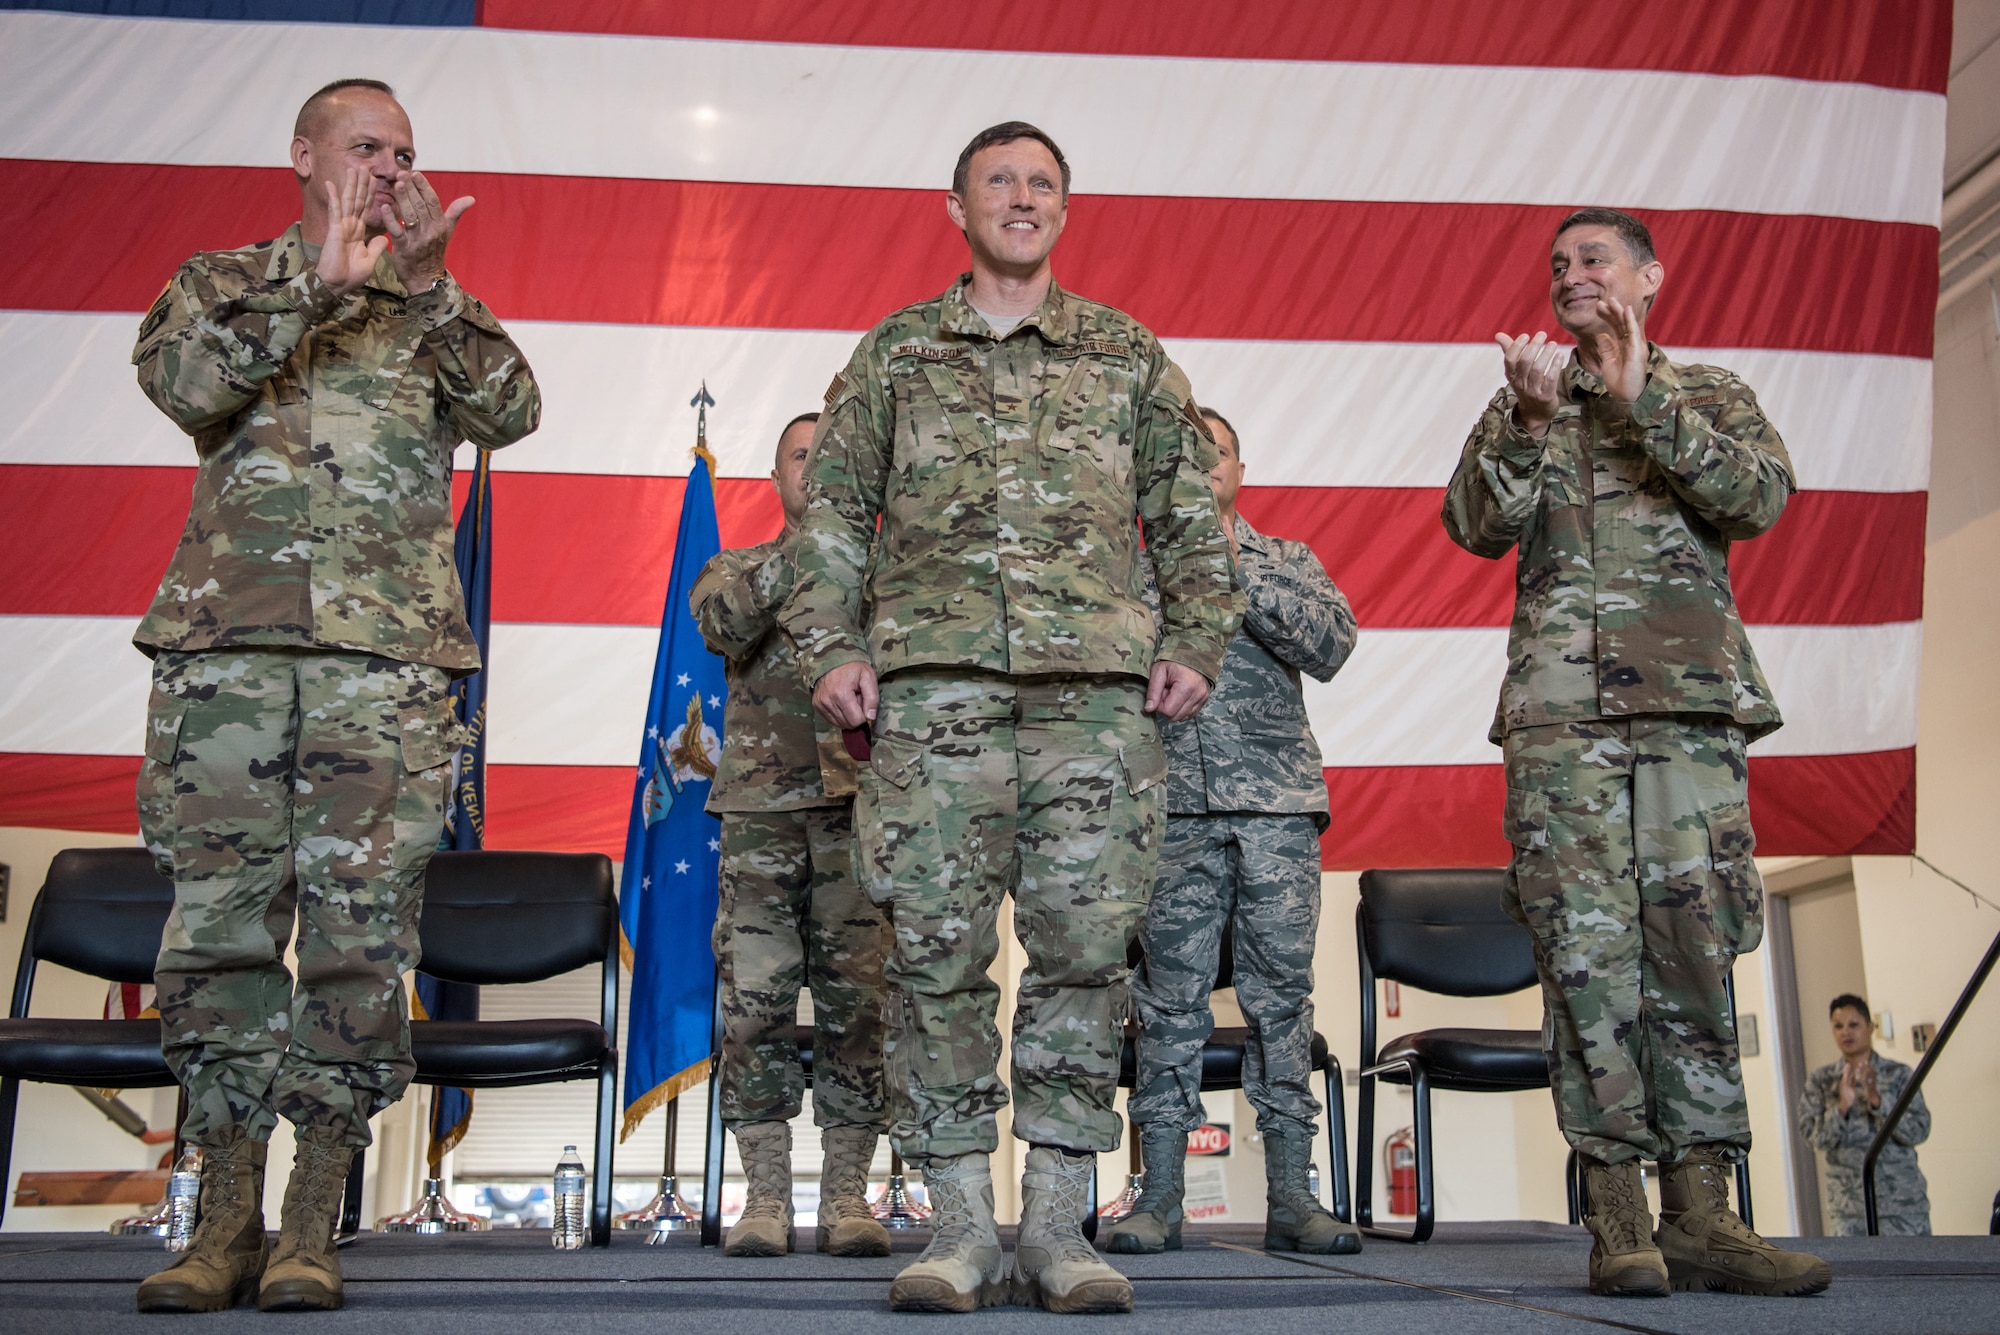 Brig. Gen. Jeffrey Wilkinson (center) assumes responsibility as Kentucky’s next assistant adjutant general for Air during a ceremony at the Kentucky Air National Guard Base in Louisville, Ky., Aug. 11, 2019. Wilkinson replaces Brig. Gen. Warren Hurst, who held the post for six years. (U.S. Air National Guard photo by Staff Sgt. Joshua Horton)